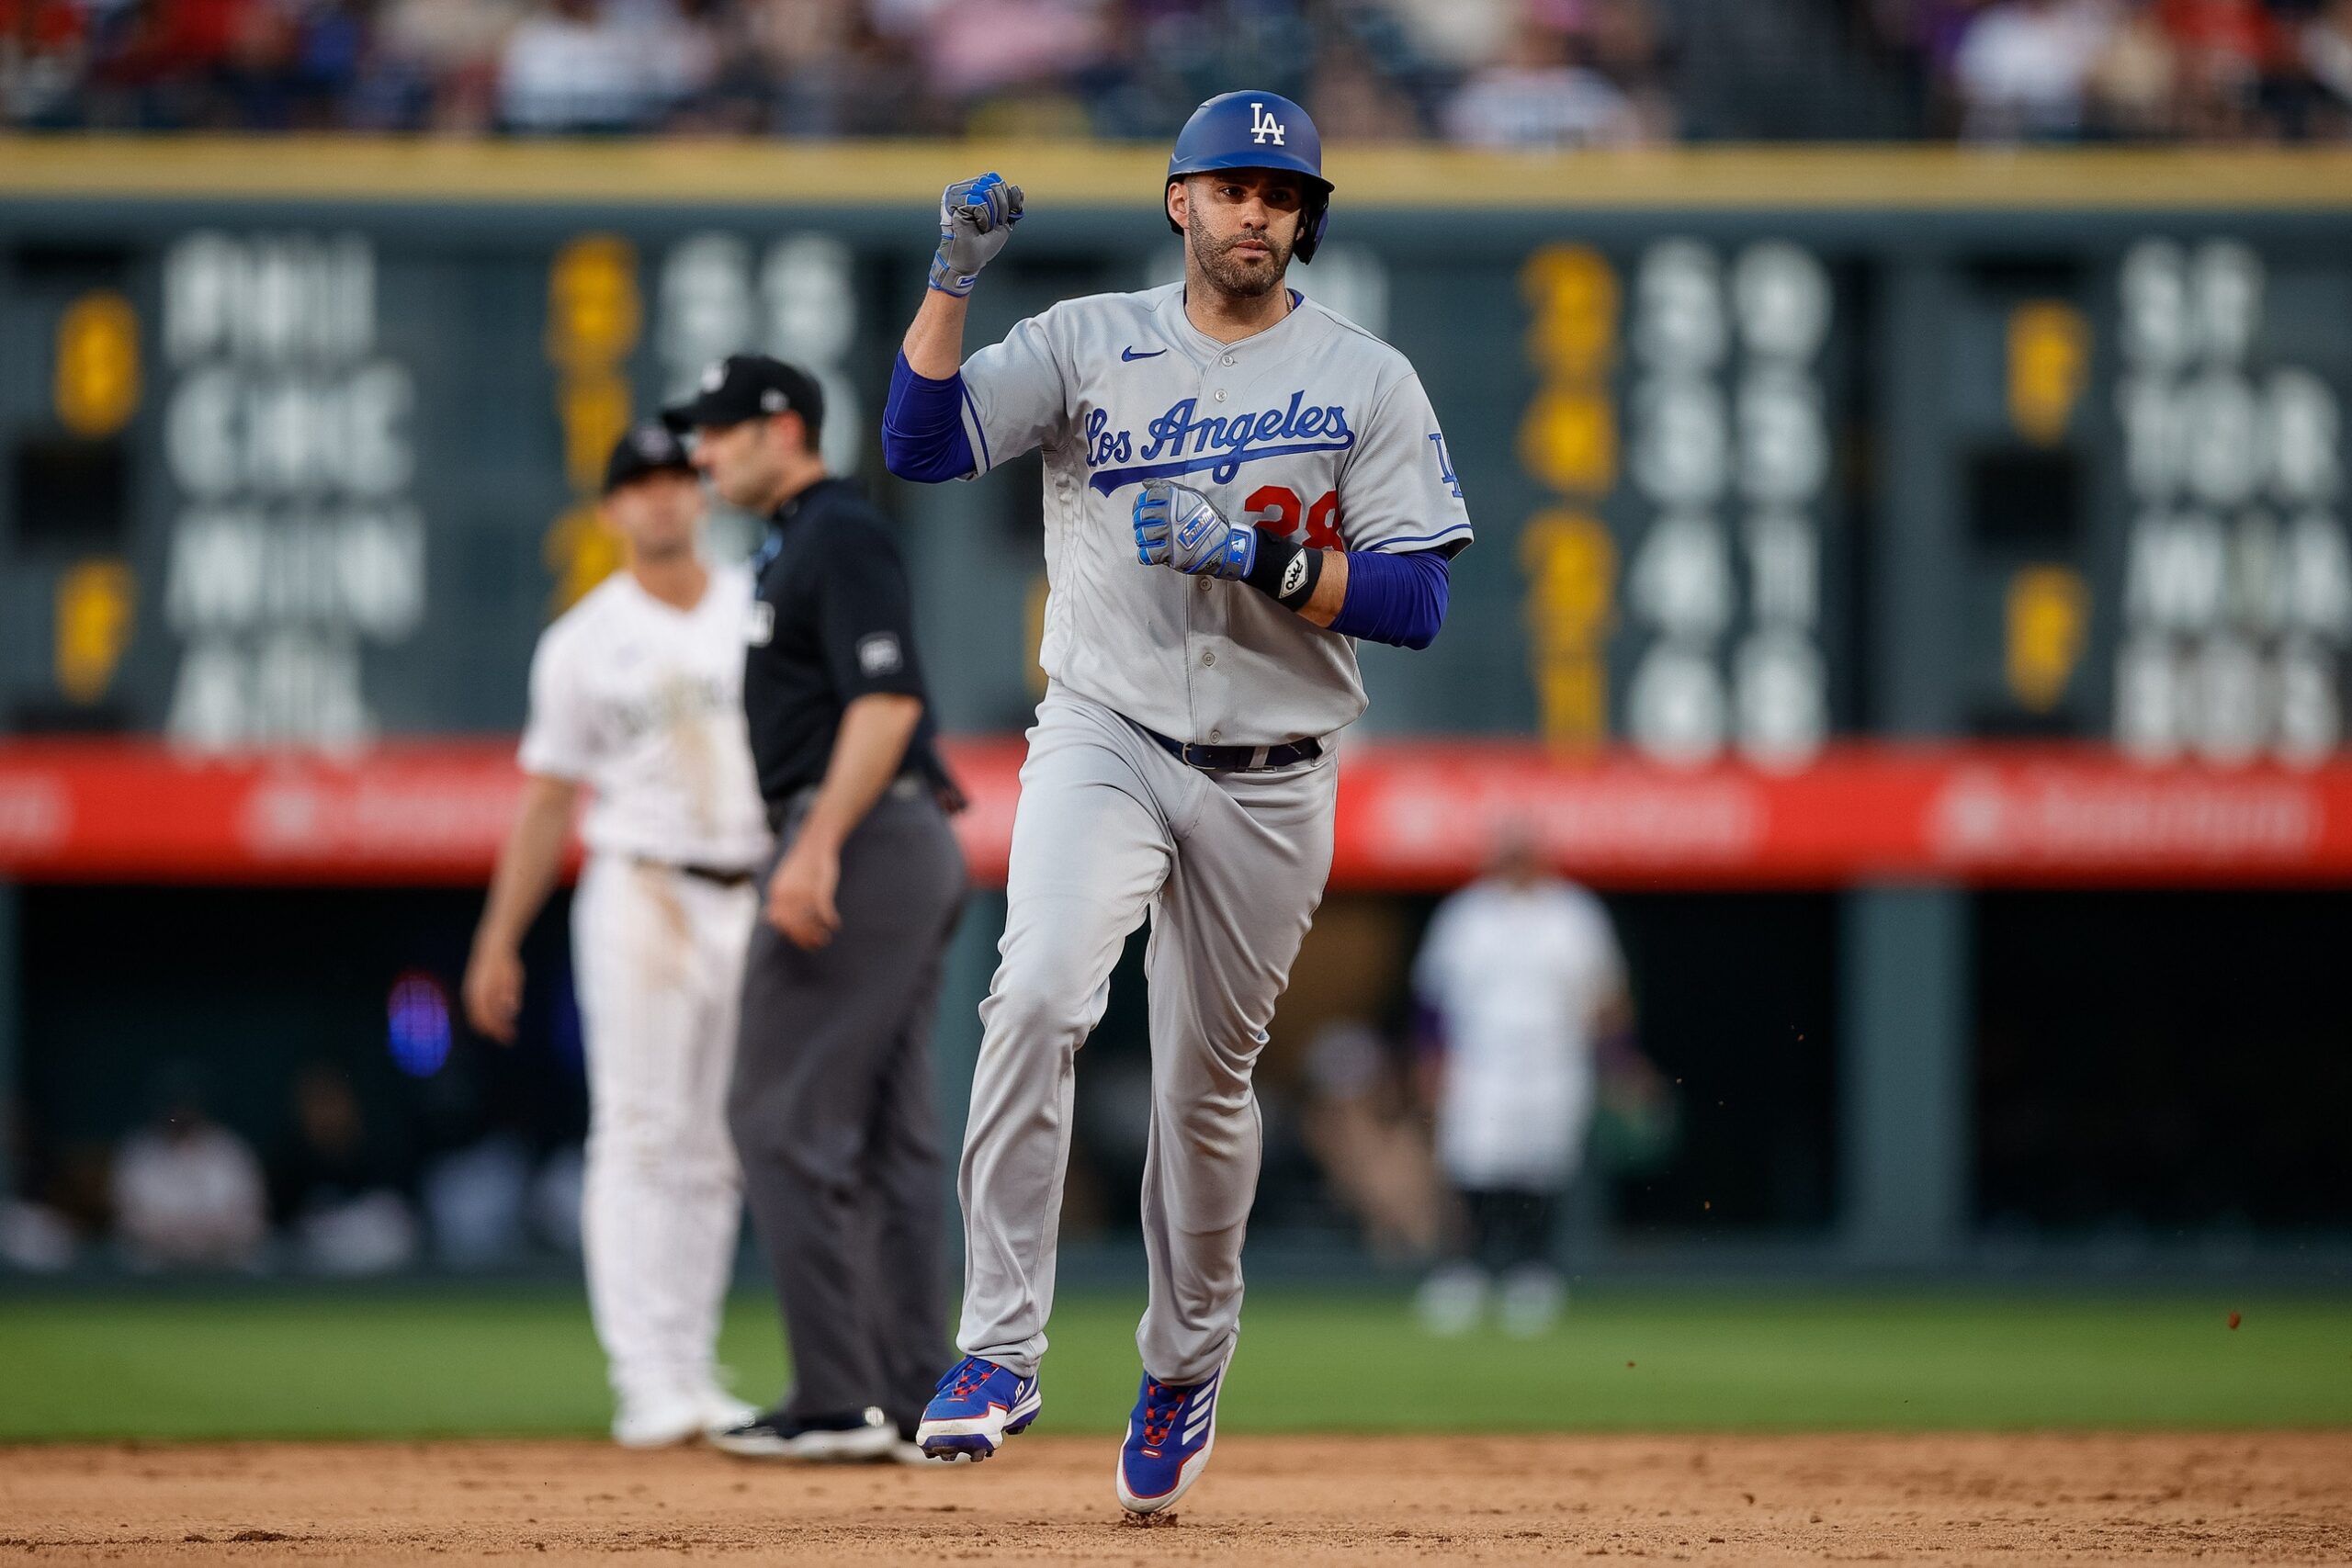 Sources: Dodgers add J.D. Martinez, bolstering lineup and